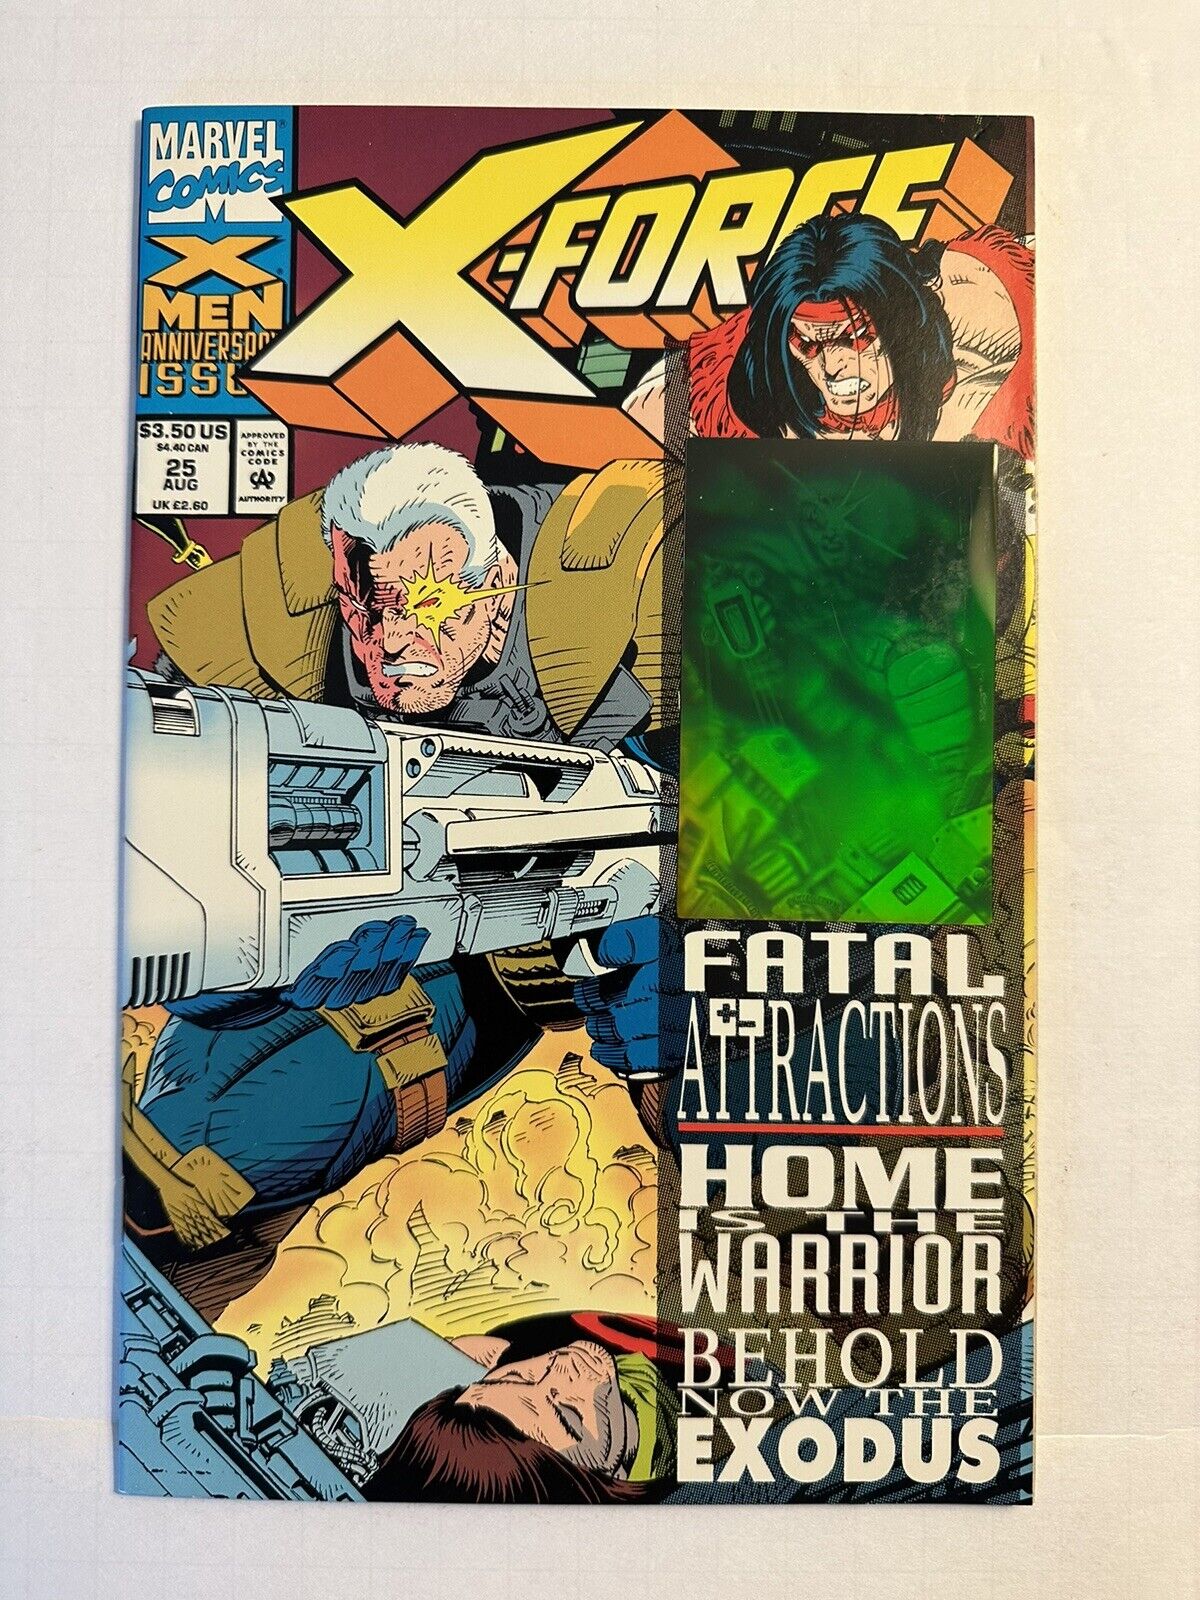 X-Force #25 X-men Anniversary Issue 1993